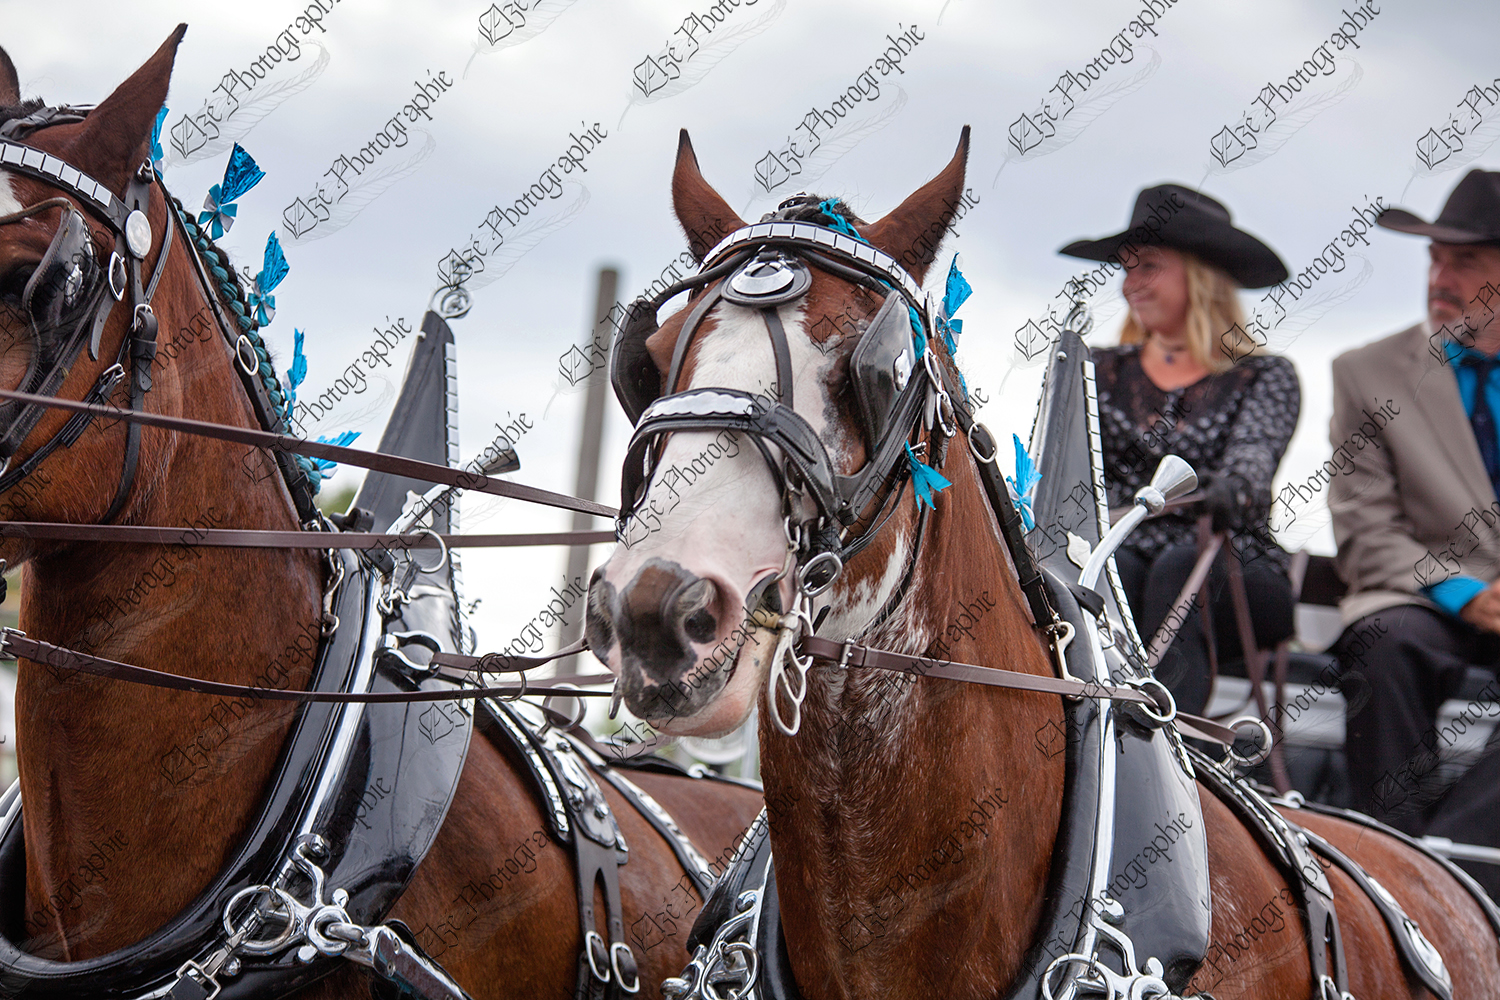 elze_photo_7281_spectacle_equestre_attelage_show_horses_clydesdale